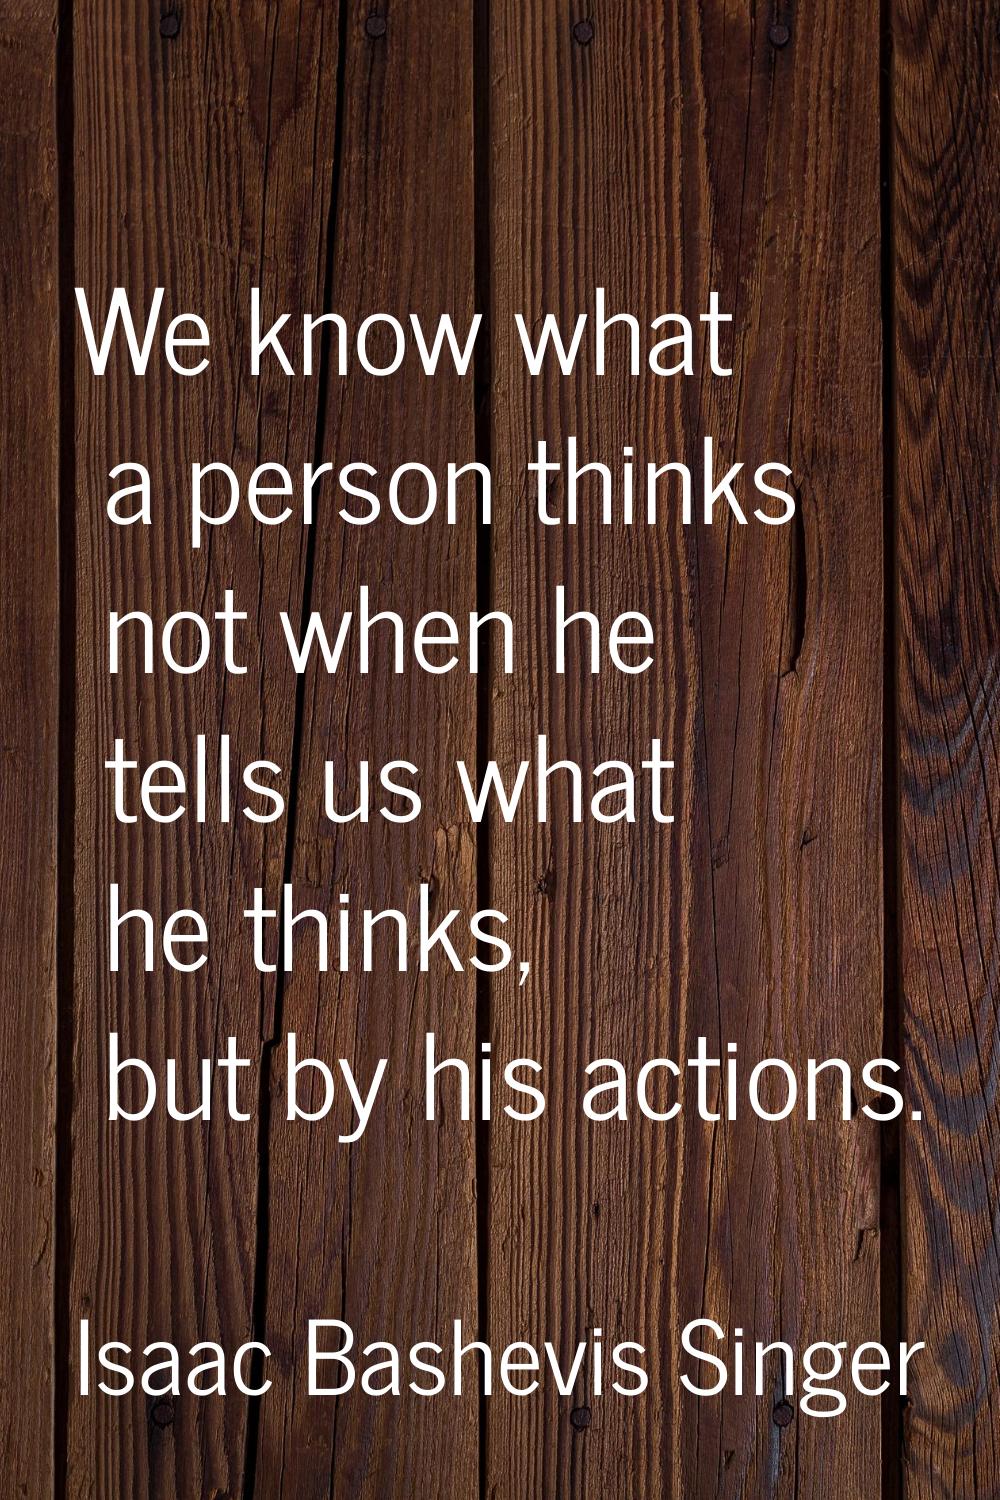 We know what a person thinks not when he tells us what he thinks, but by his actions.